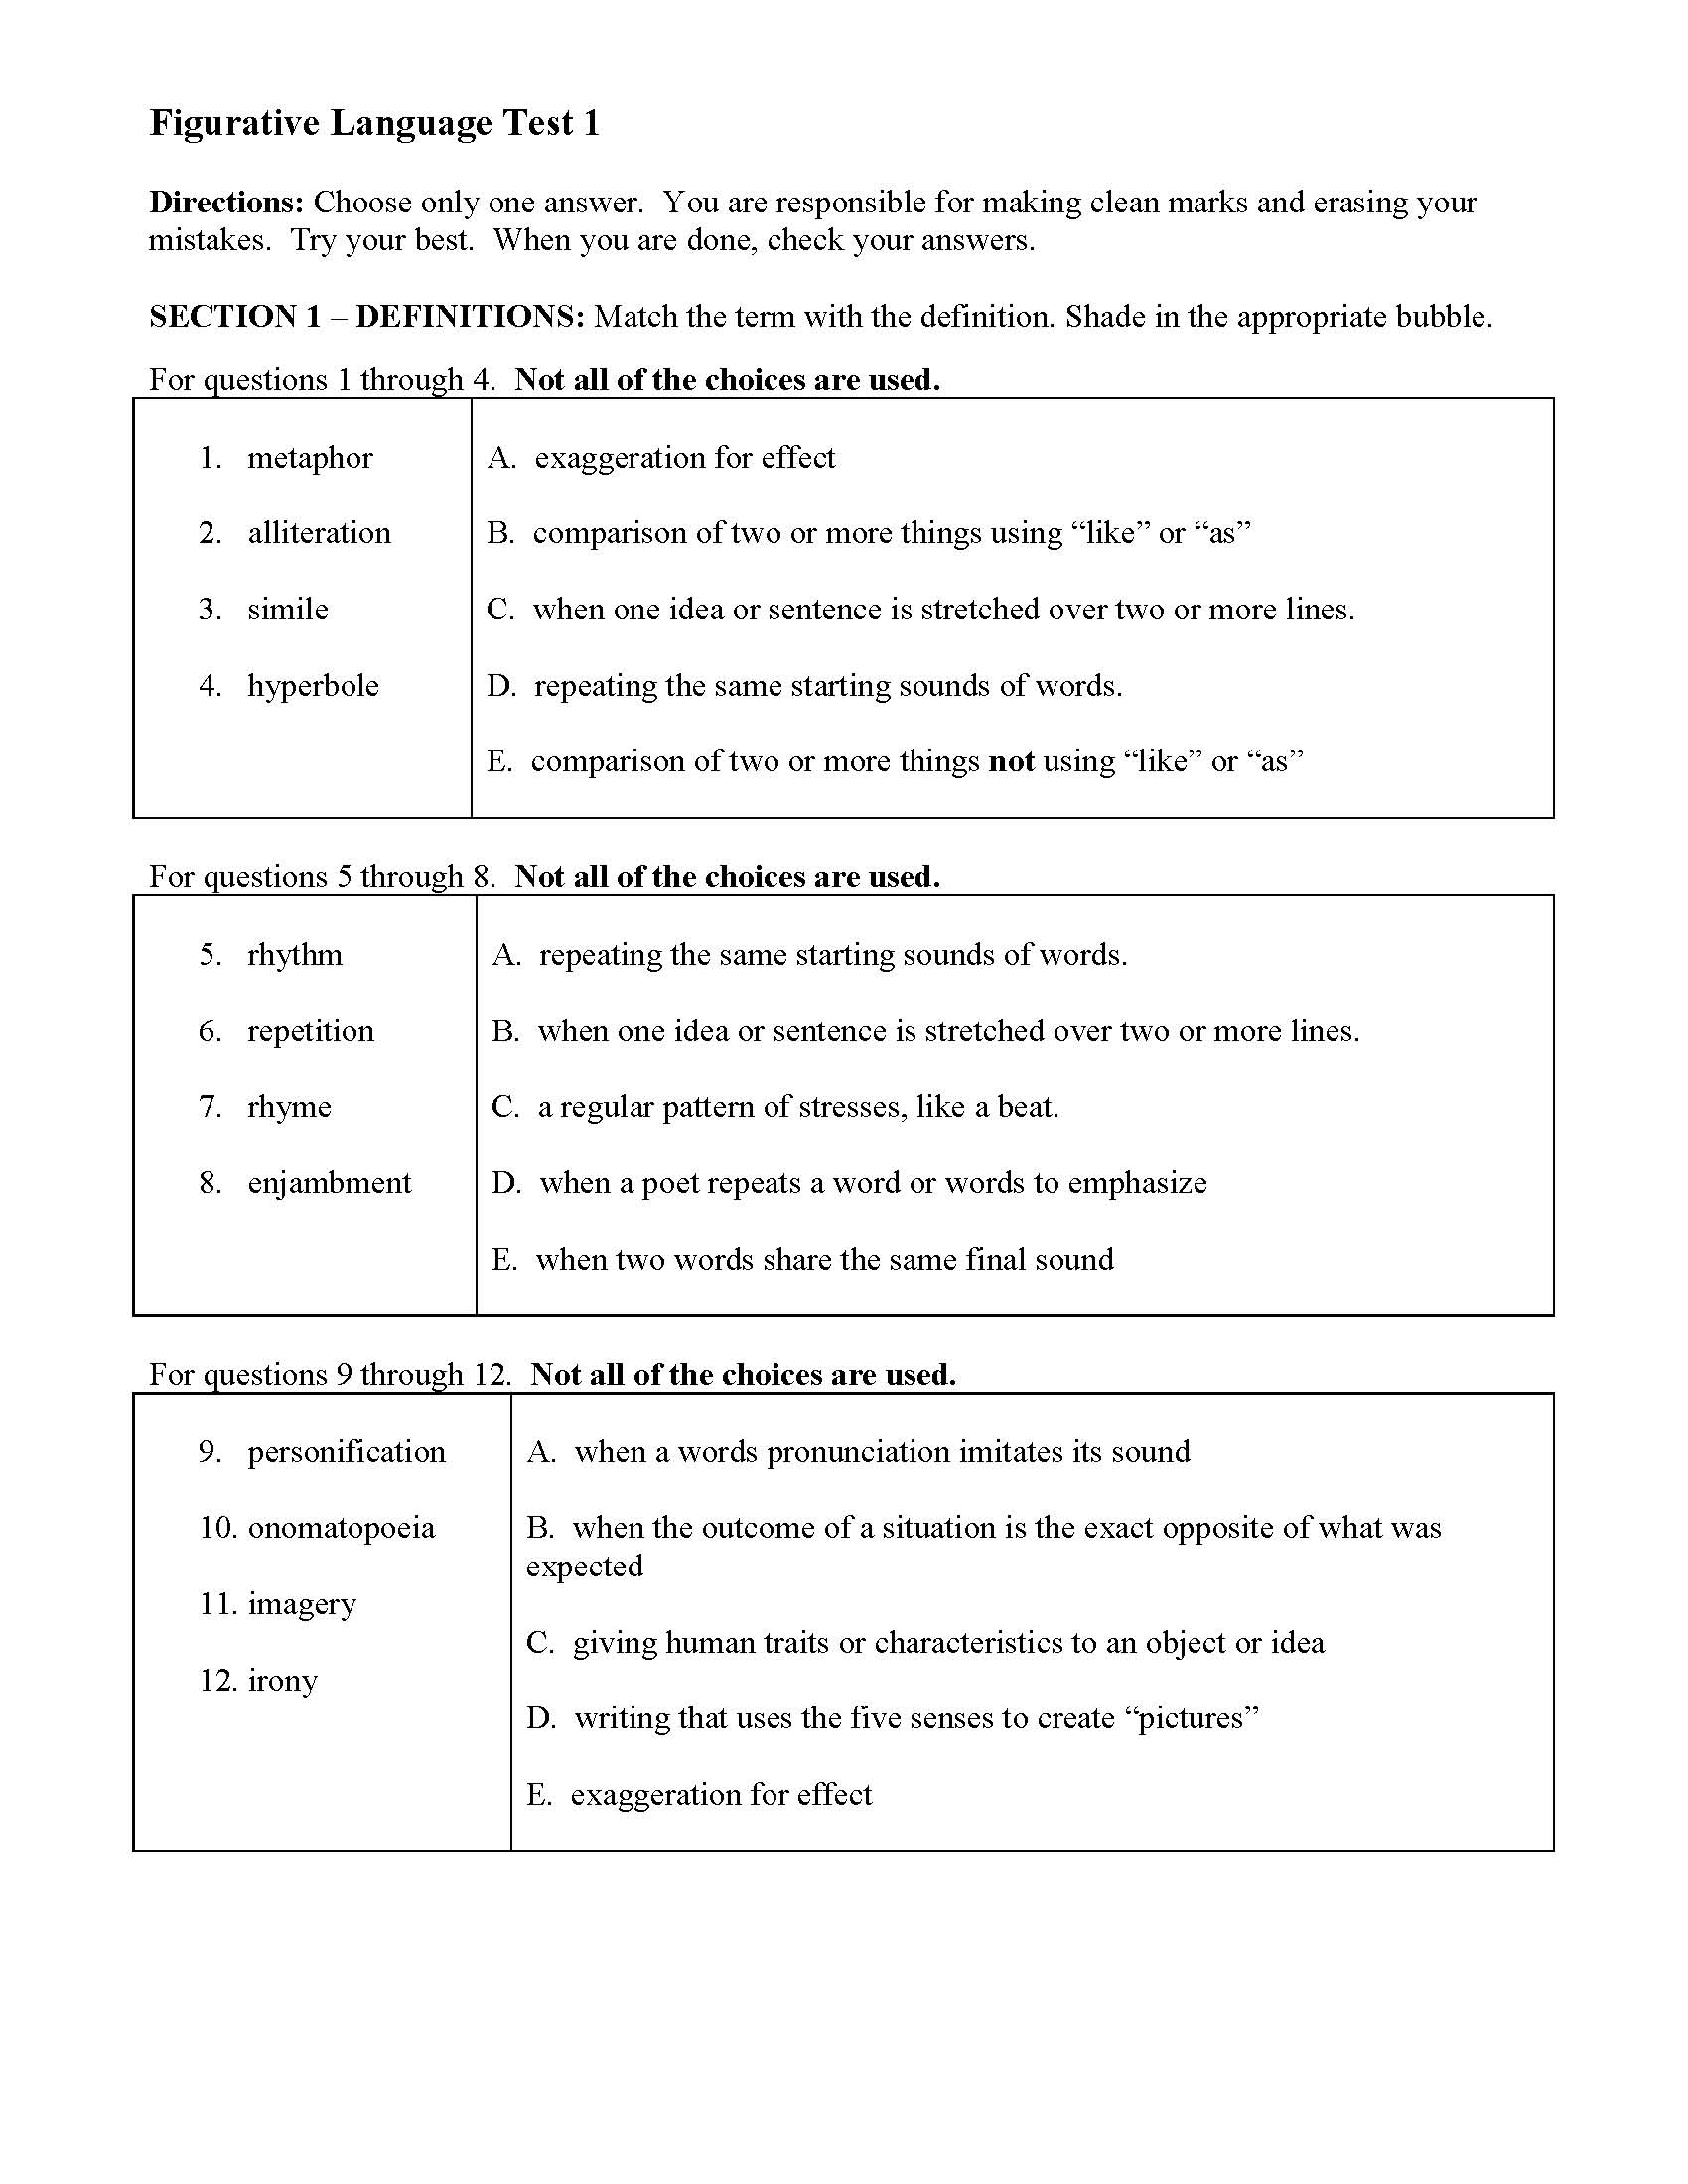 This is a preview image of Figurative Language Test. Click on it to enlarge it or view the source file.